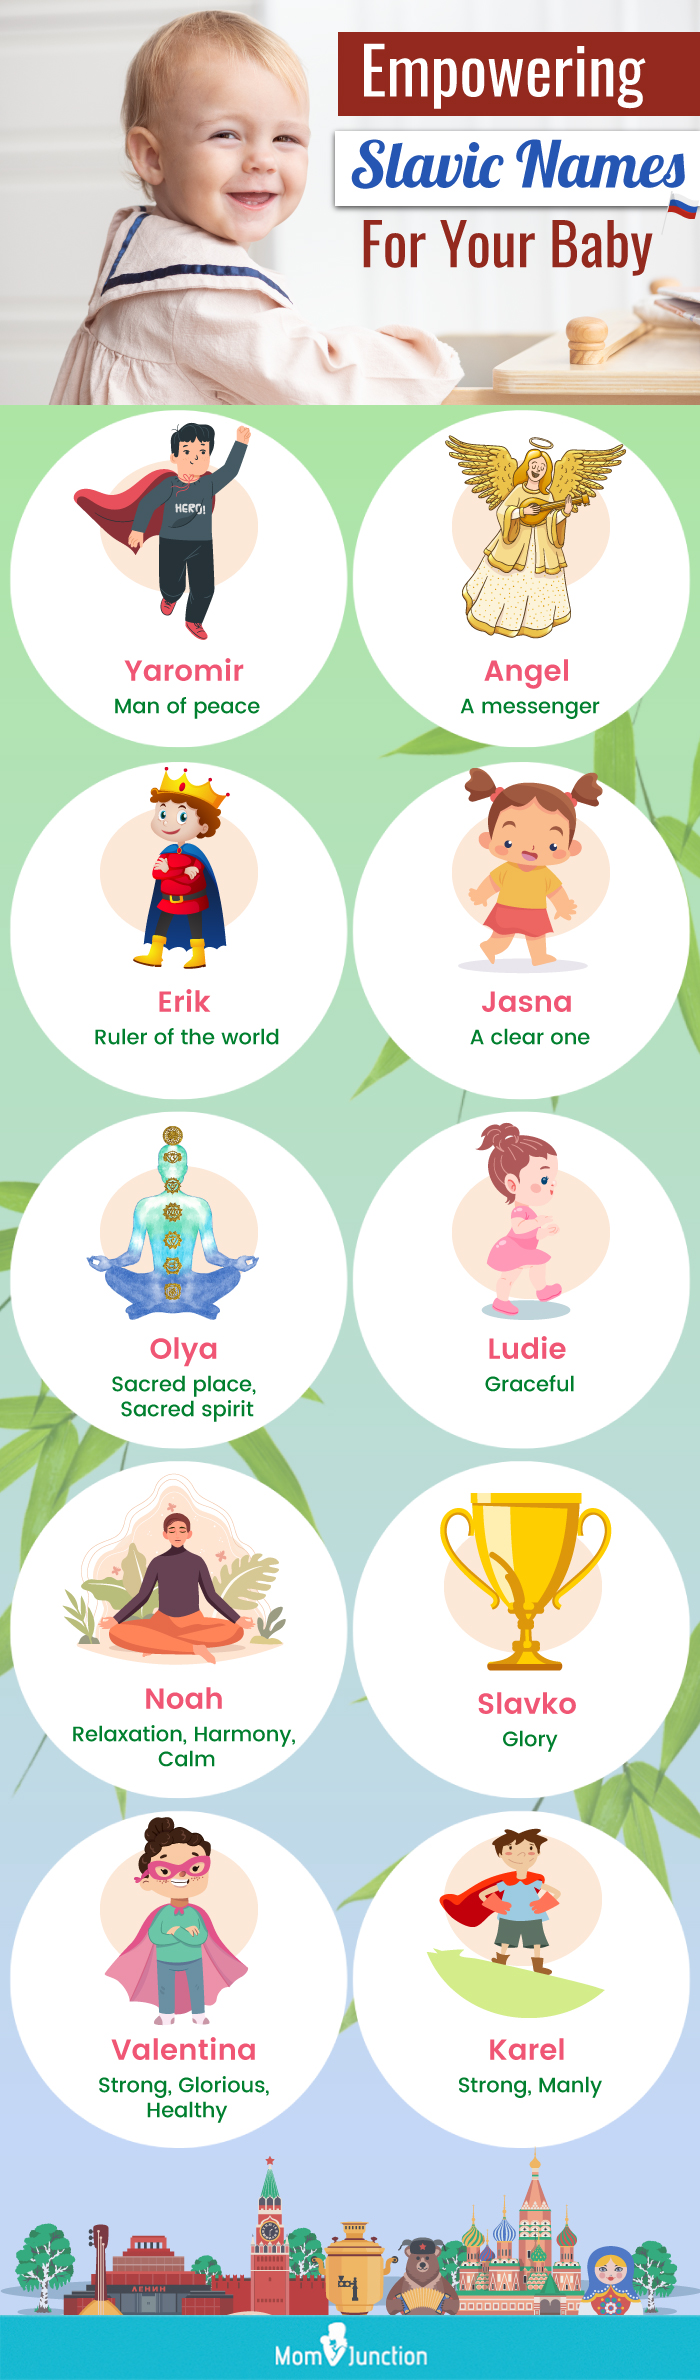 empowering slavic names for your baby (infographic)